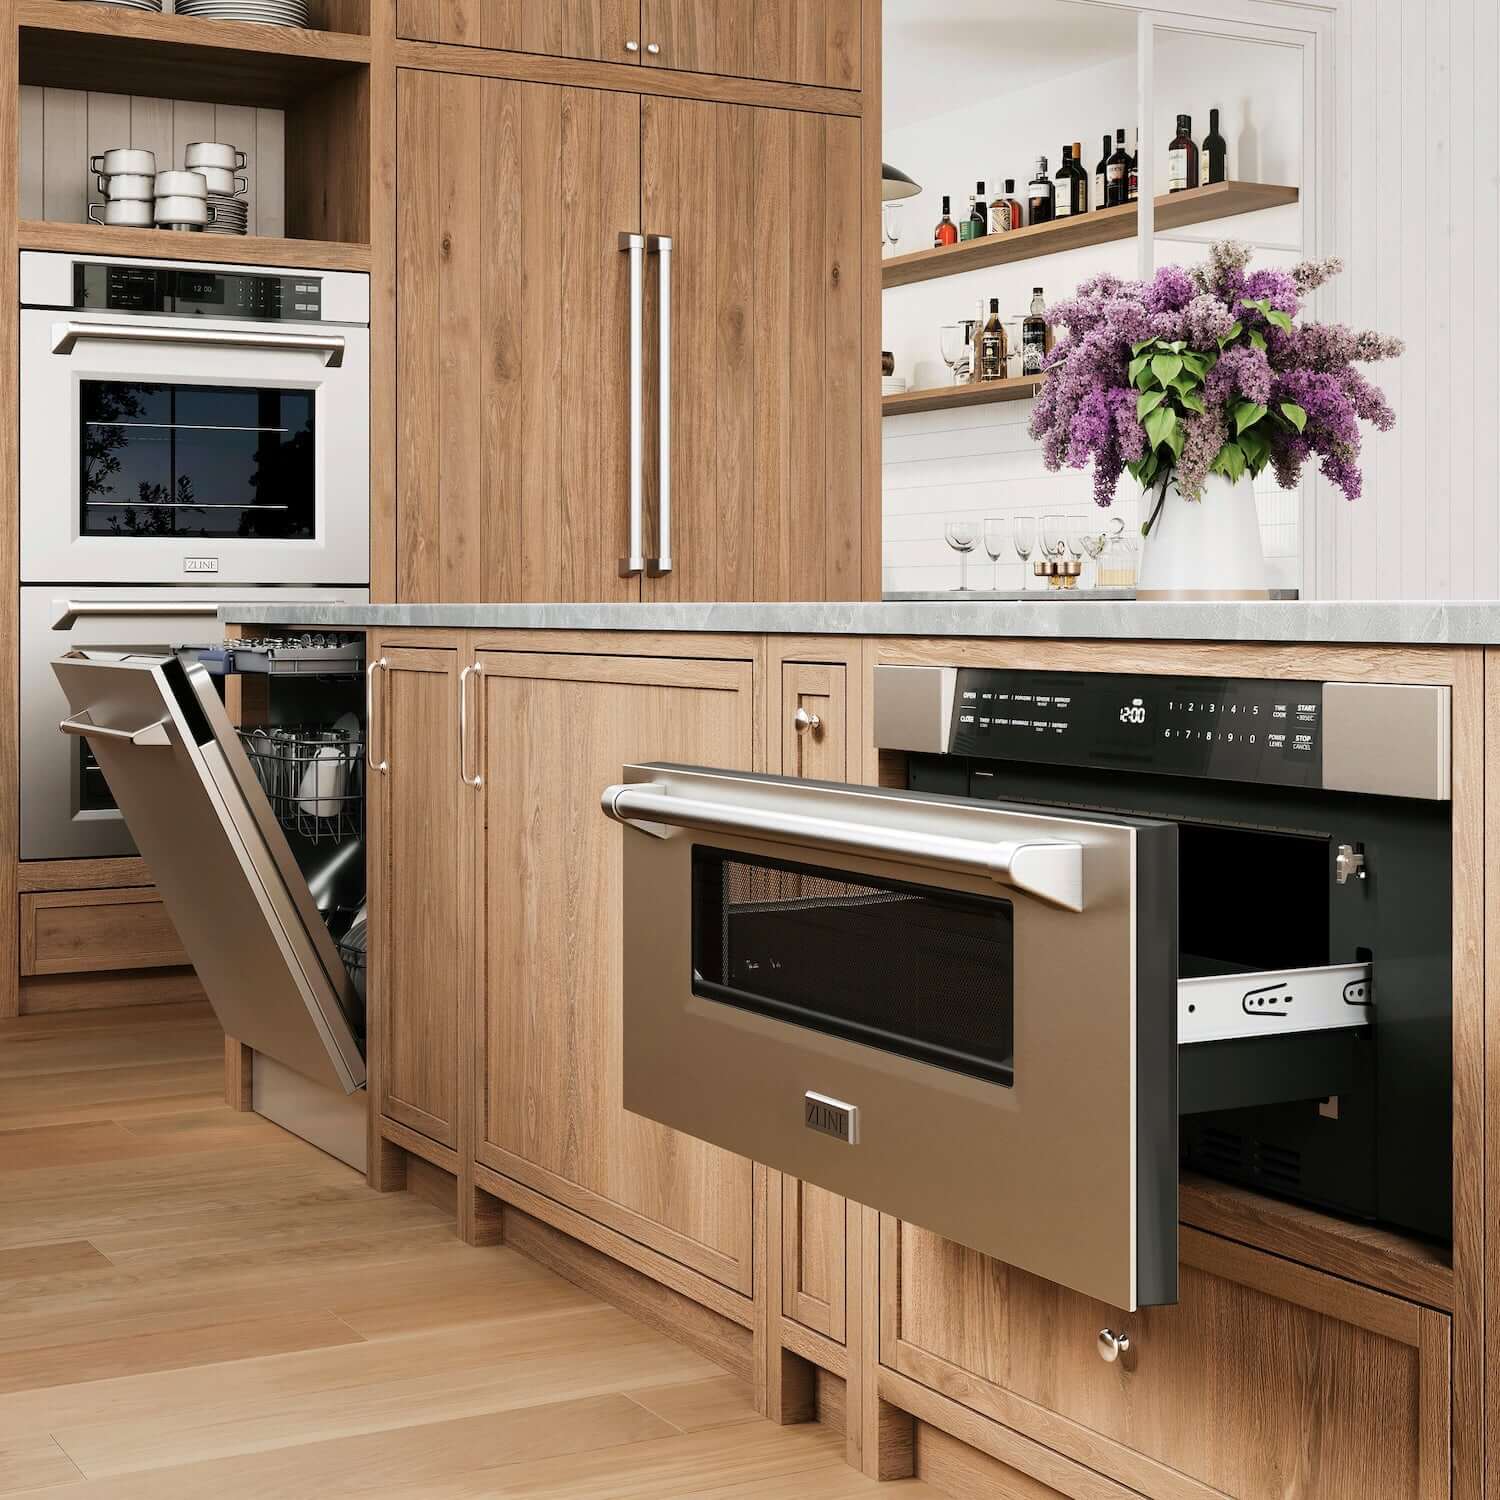 ZLINE double wall oven, dishwasher, and microwave drawer built-in to wood cabinetry in a kitchen.